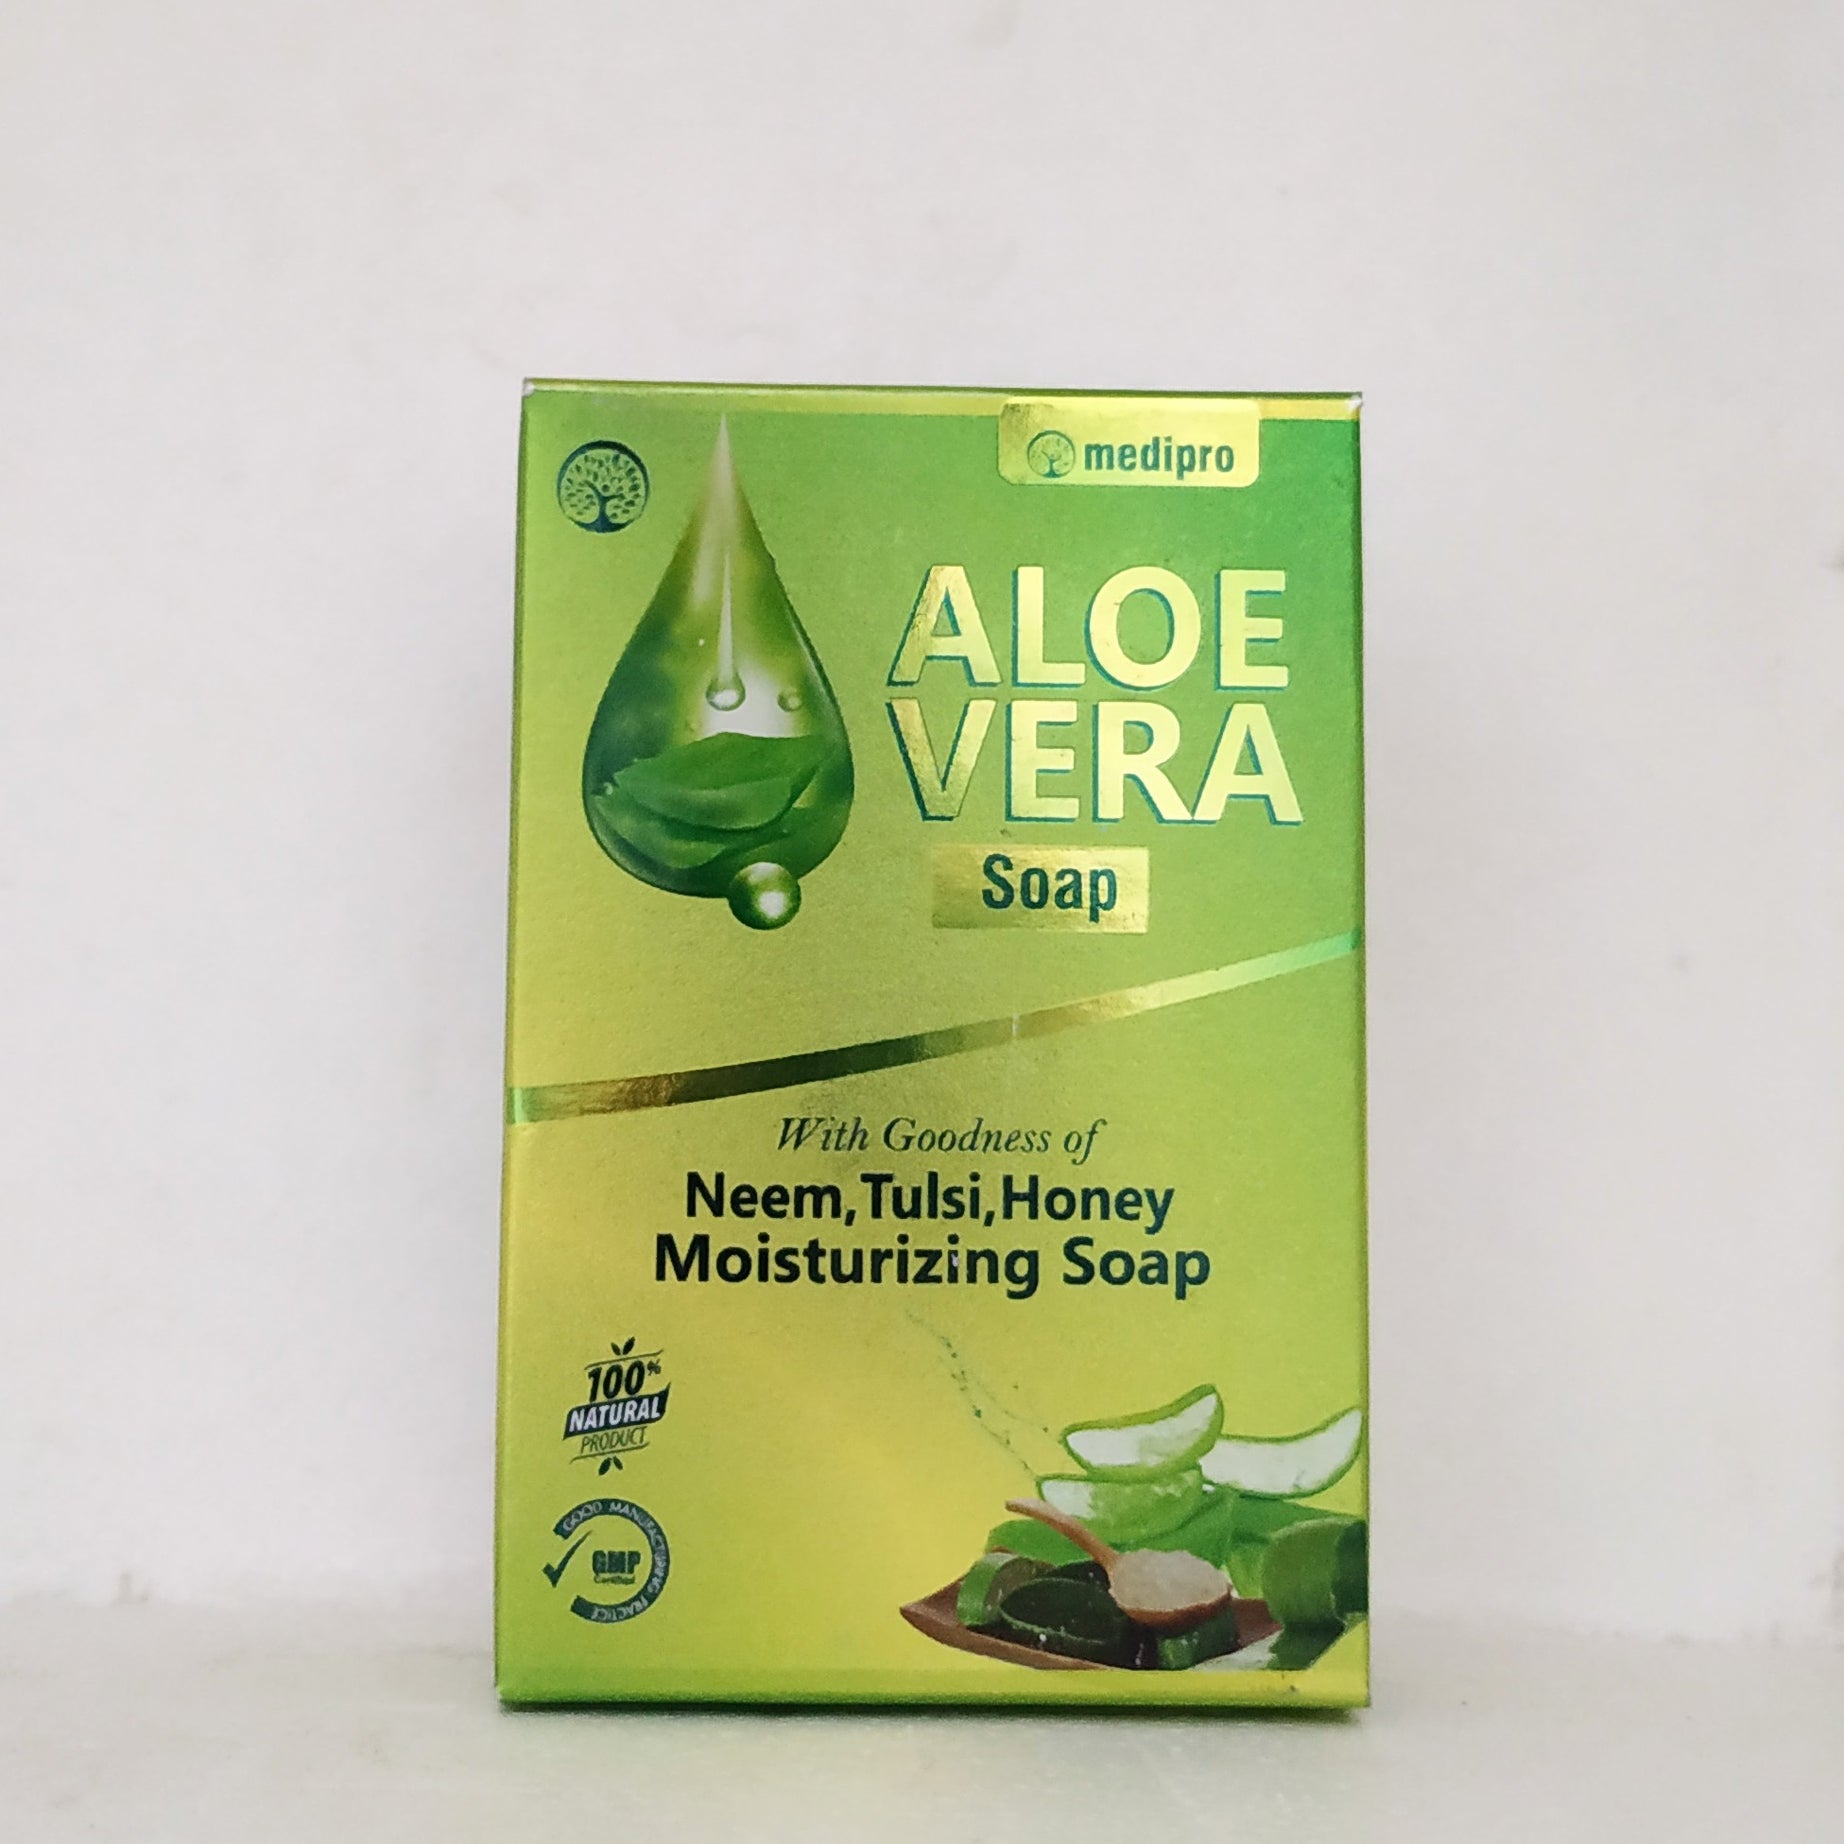 Shop Medipro Aloevera Soap 75gm at price 72.00 from Medipro Online - Ayush Care